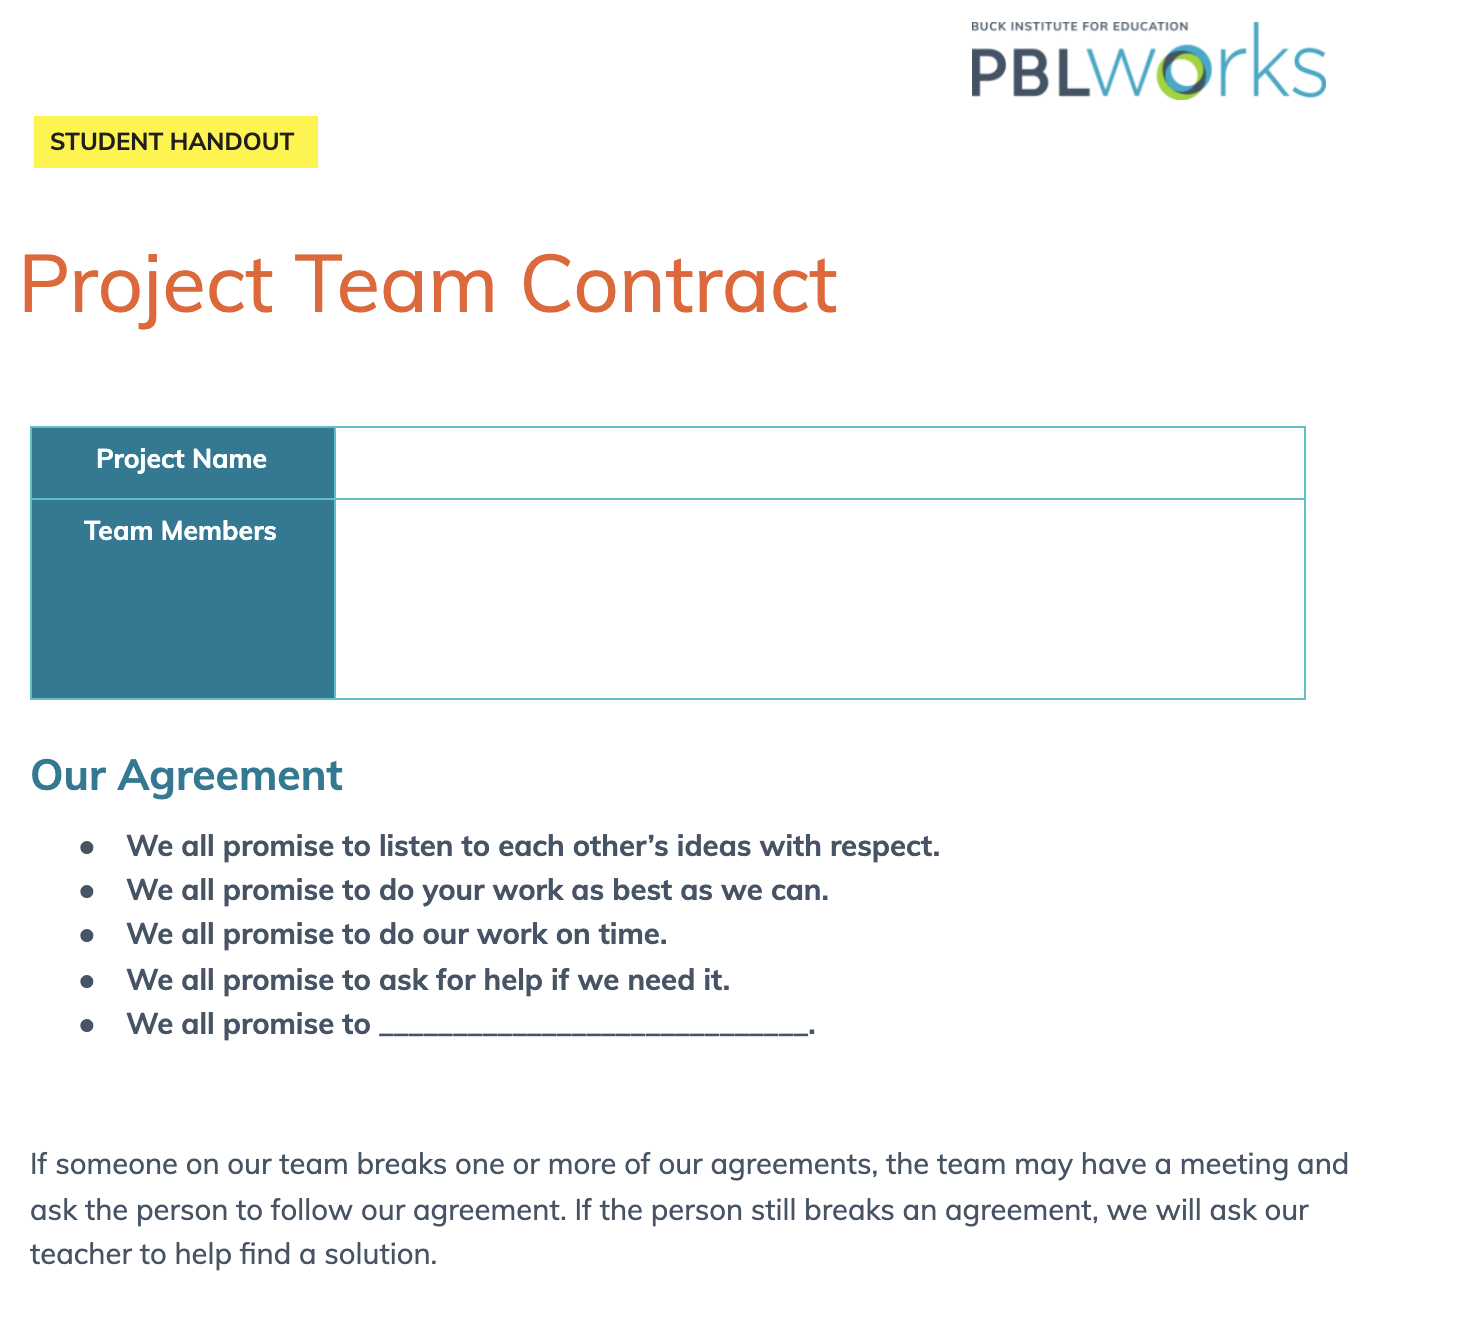 Project Team Contract Mypblworks